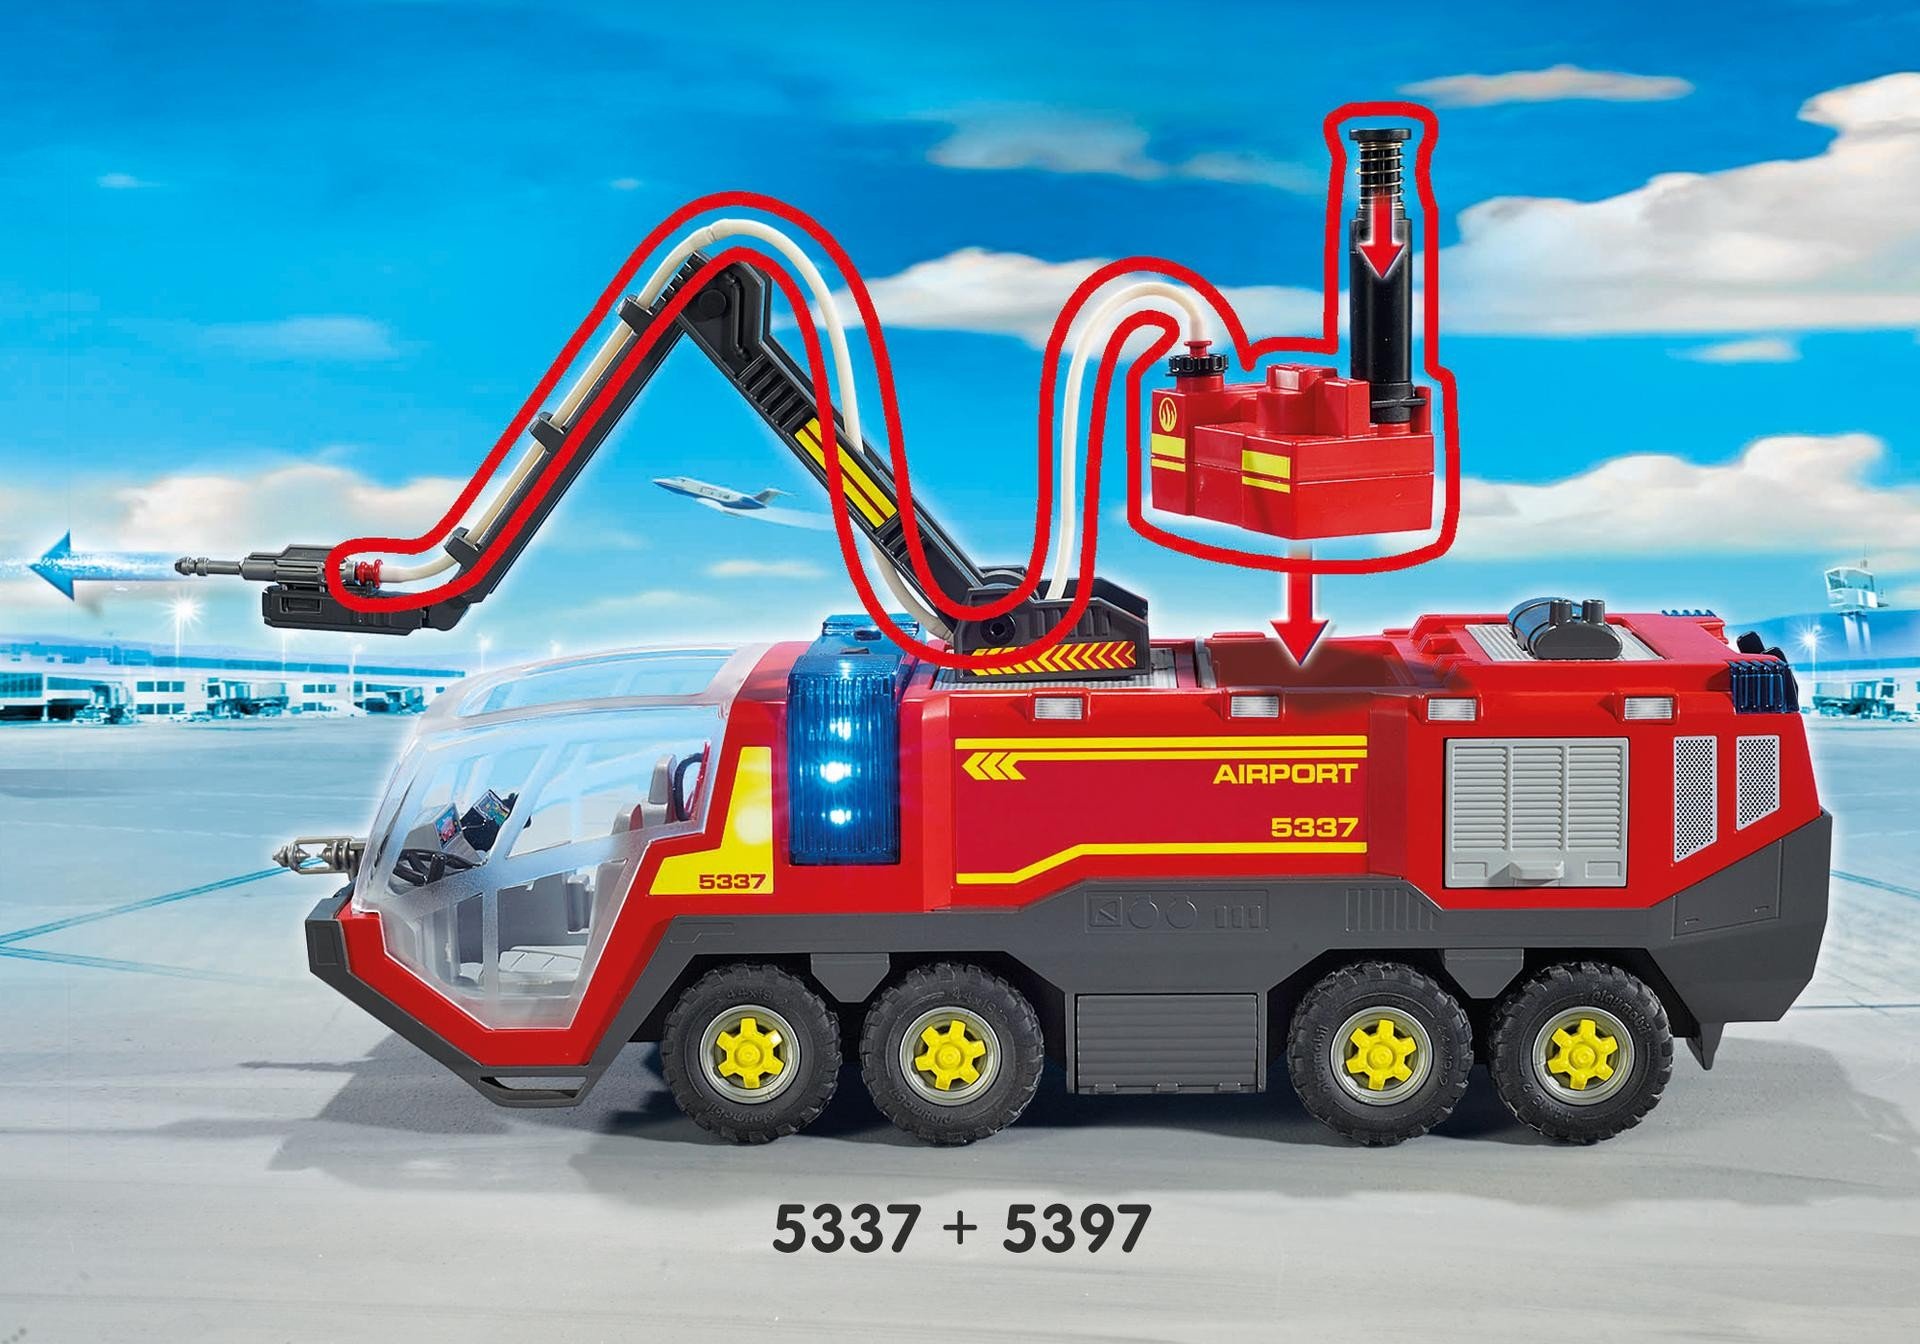 Buy Playmobil - Airport Fire Engine with Lights and Sound (5337)